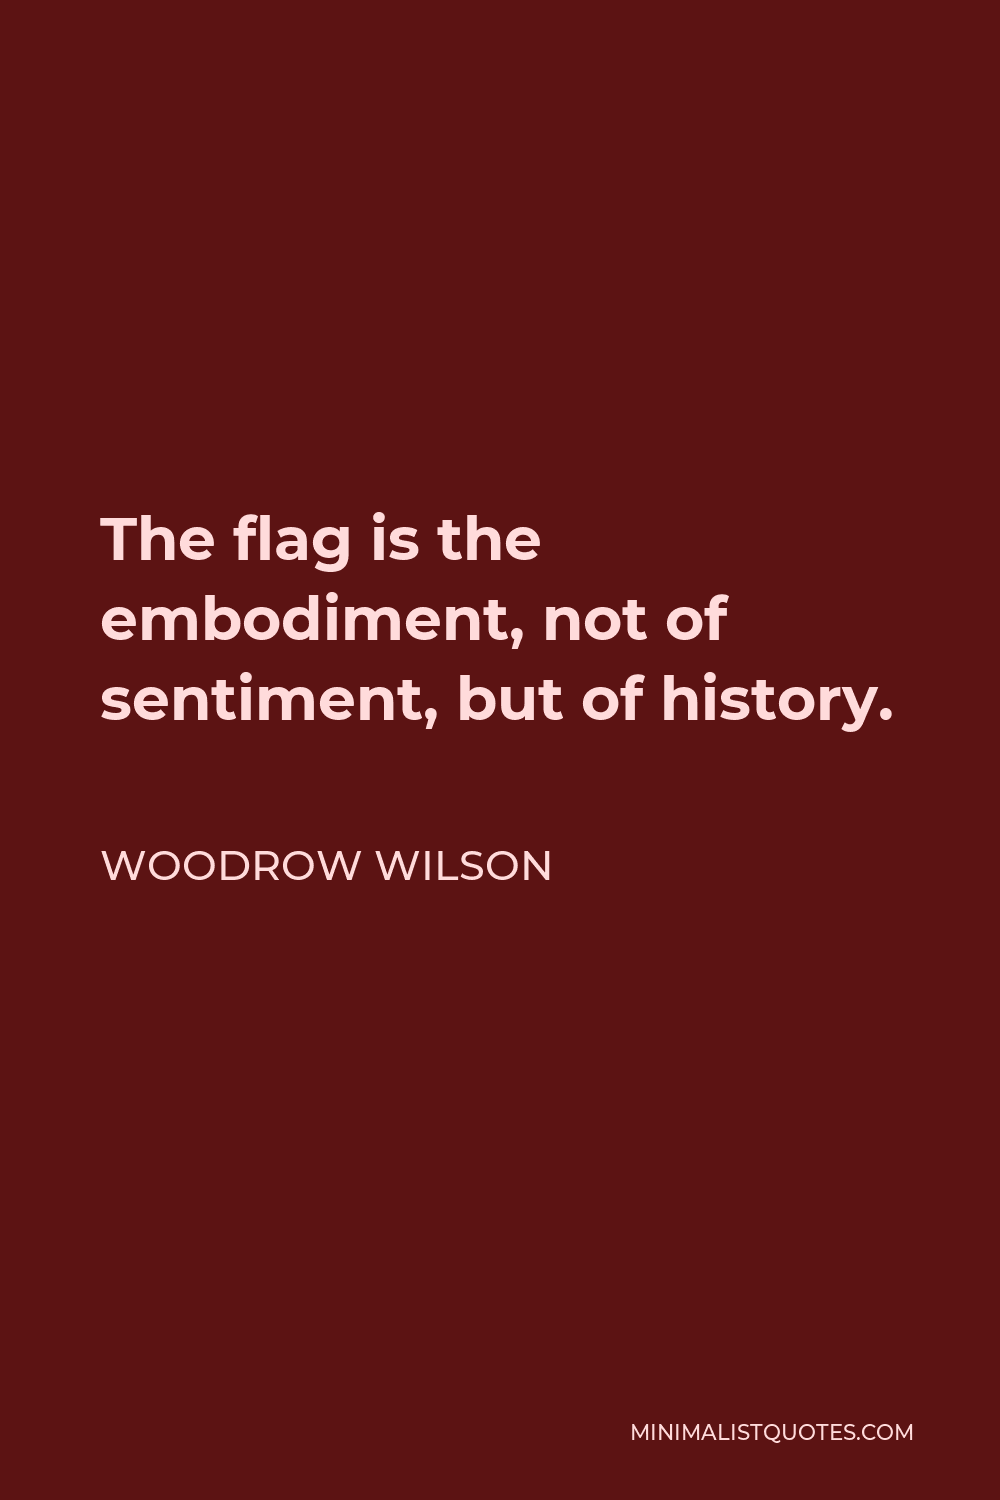 Woodrow Wilson Quote - The flag is the embodiment, not of sentiment, but of history.